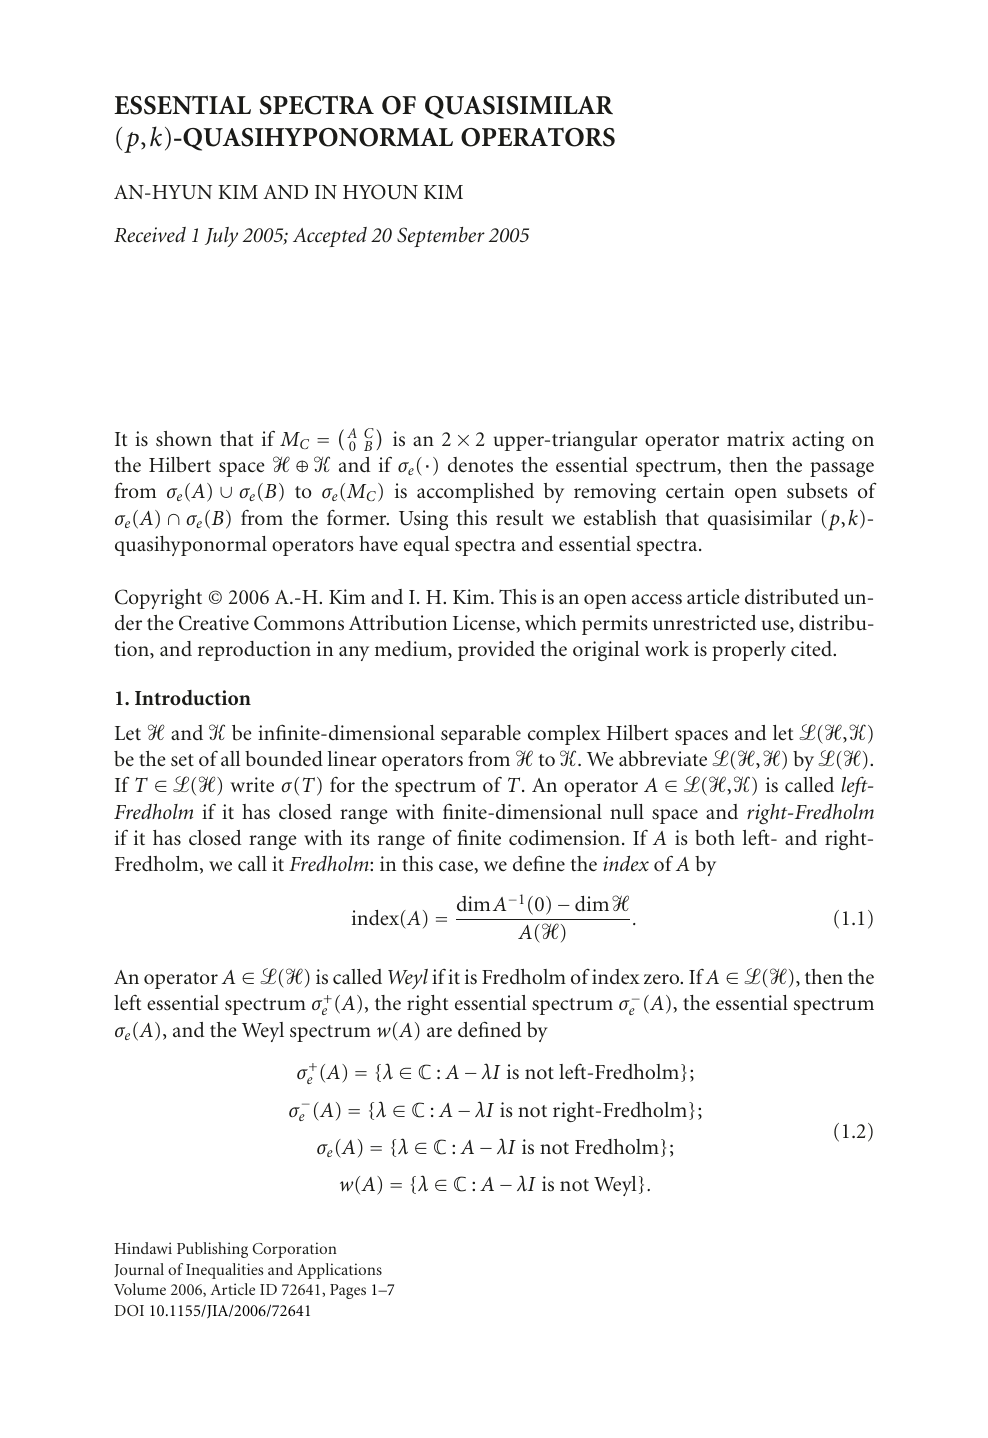 Essential Spectra Of Quasisimilar P K Quasihyponormal Operators Topic Of Research Paper In Mathematics Download Scholarly Article Pdf And Read For Free On Cyberleninka Open Science Hub